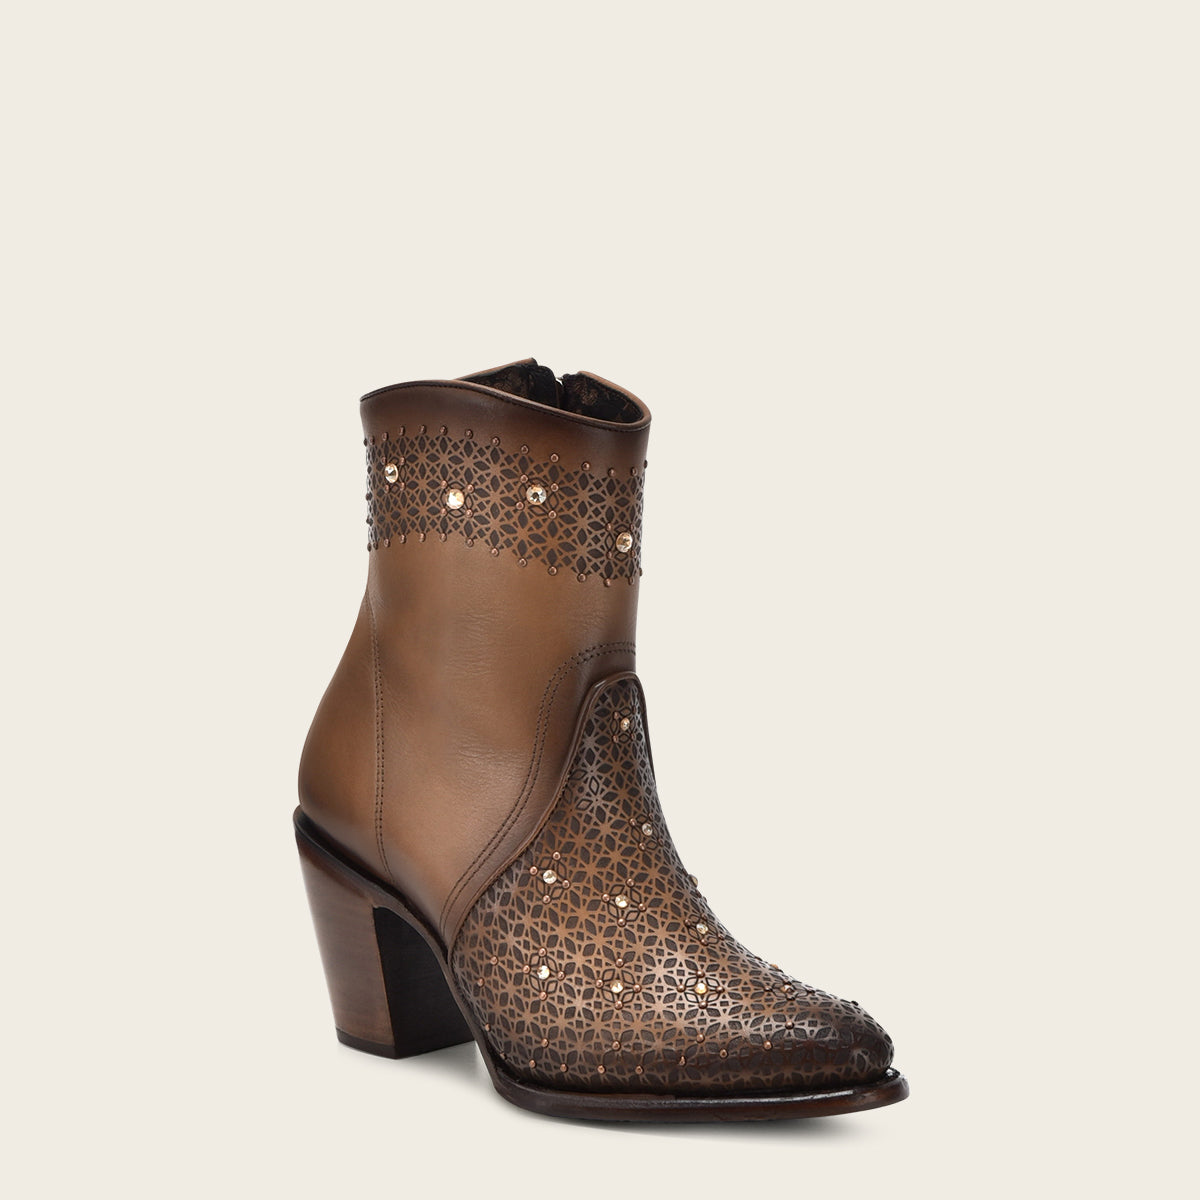 Perforated honey brown leather ankle bootie with Austrian crystals